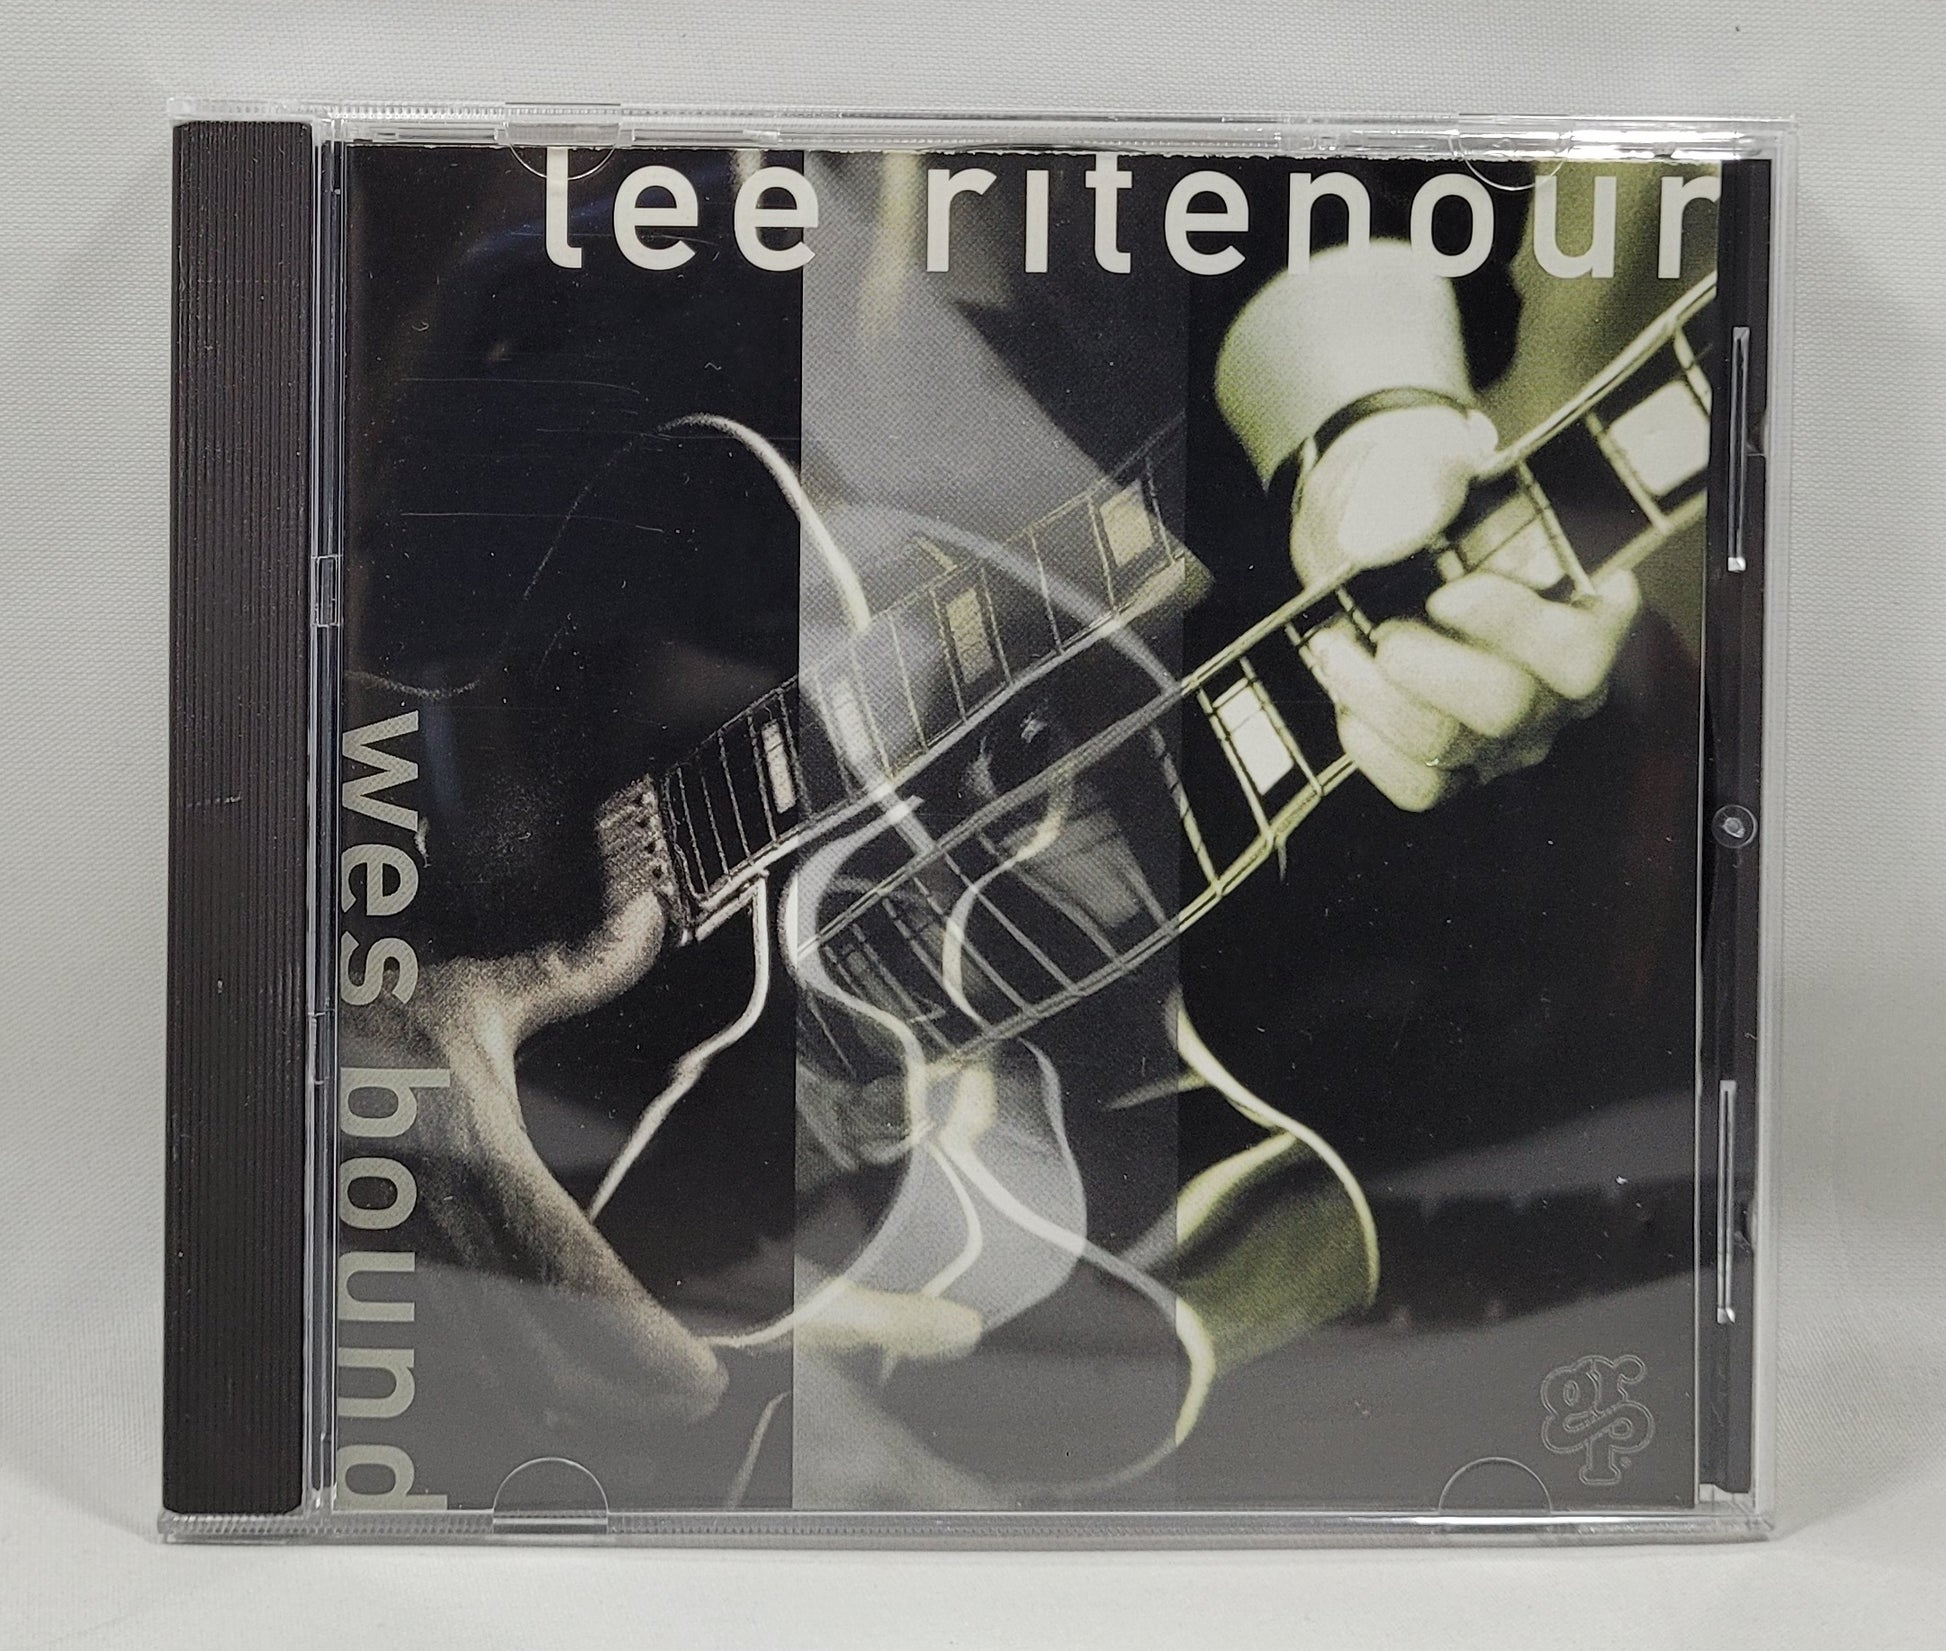 Lee Ritenour - Wes Bound [1993 Club Edition] [Used CD]